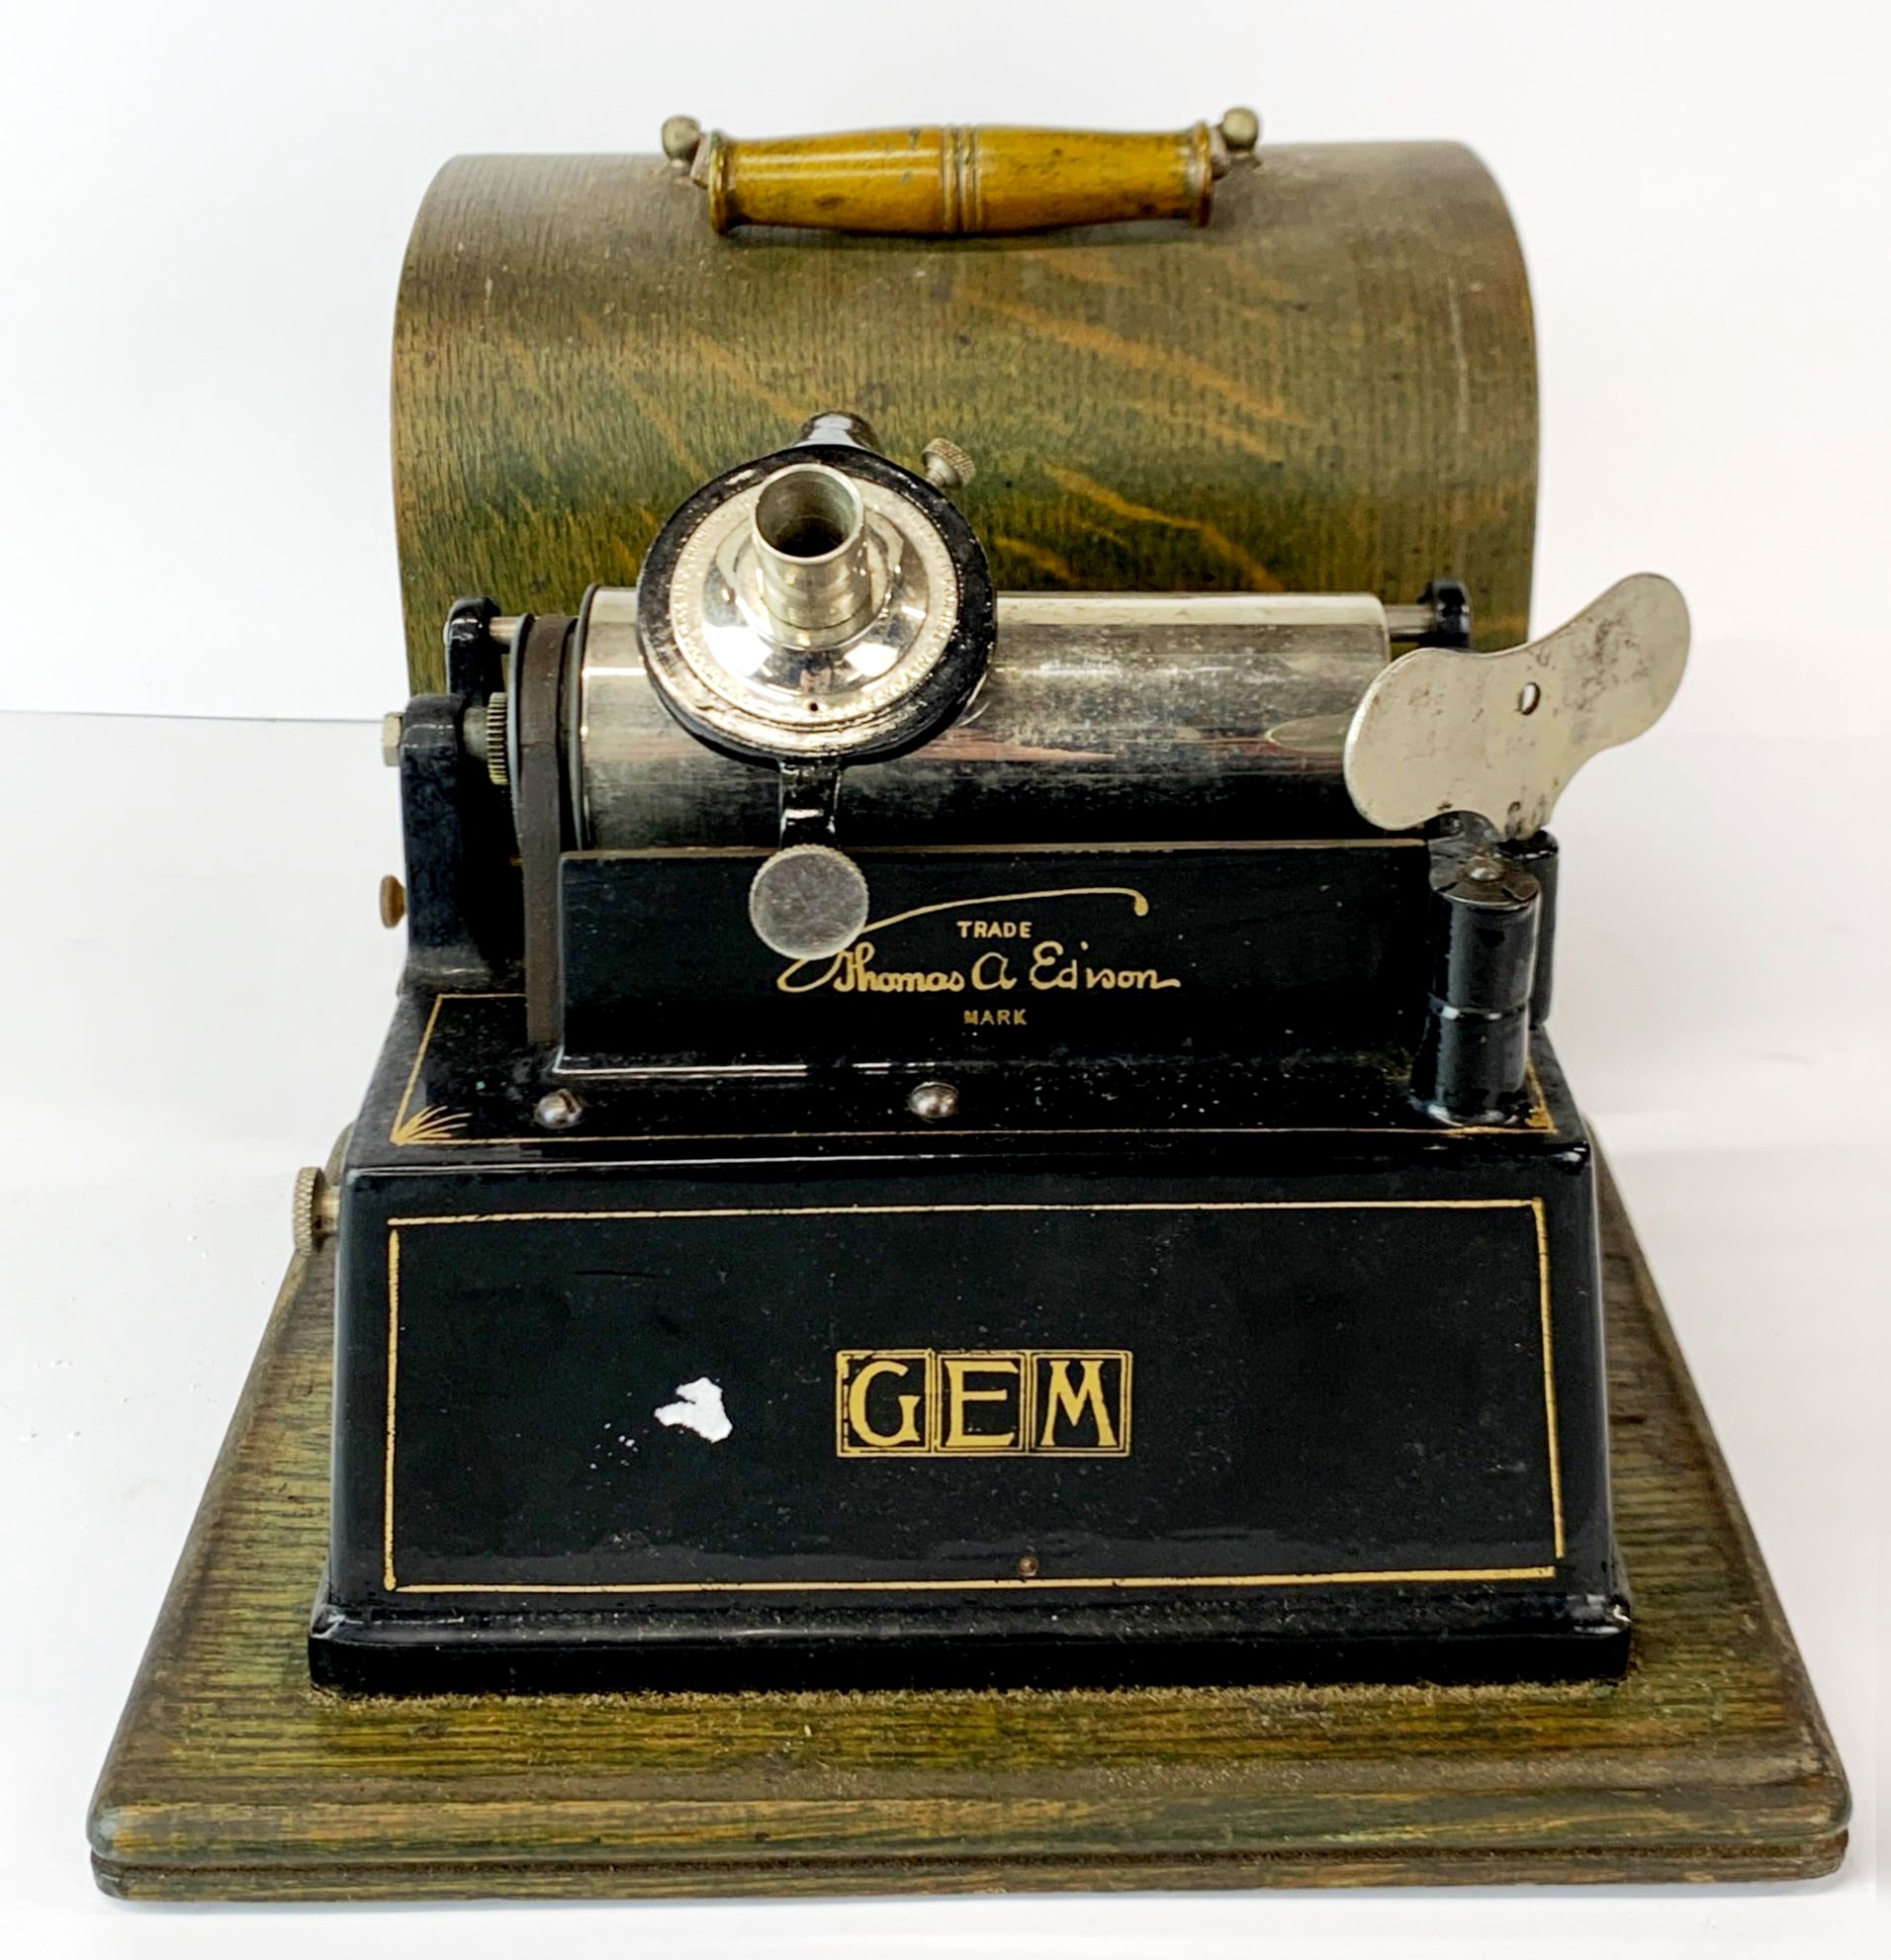 An early cased Thomas Edison gem wax cylinder phonograph. No horn or cylinders.